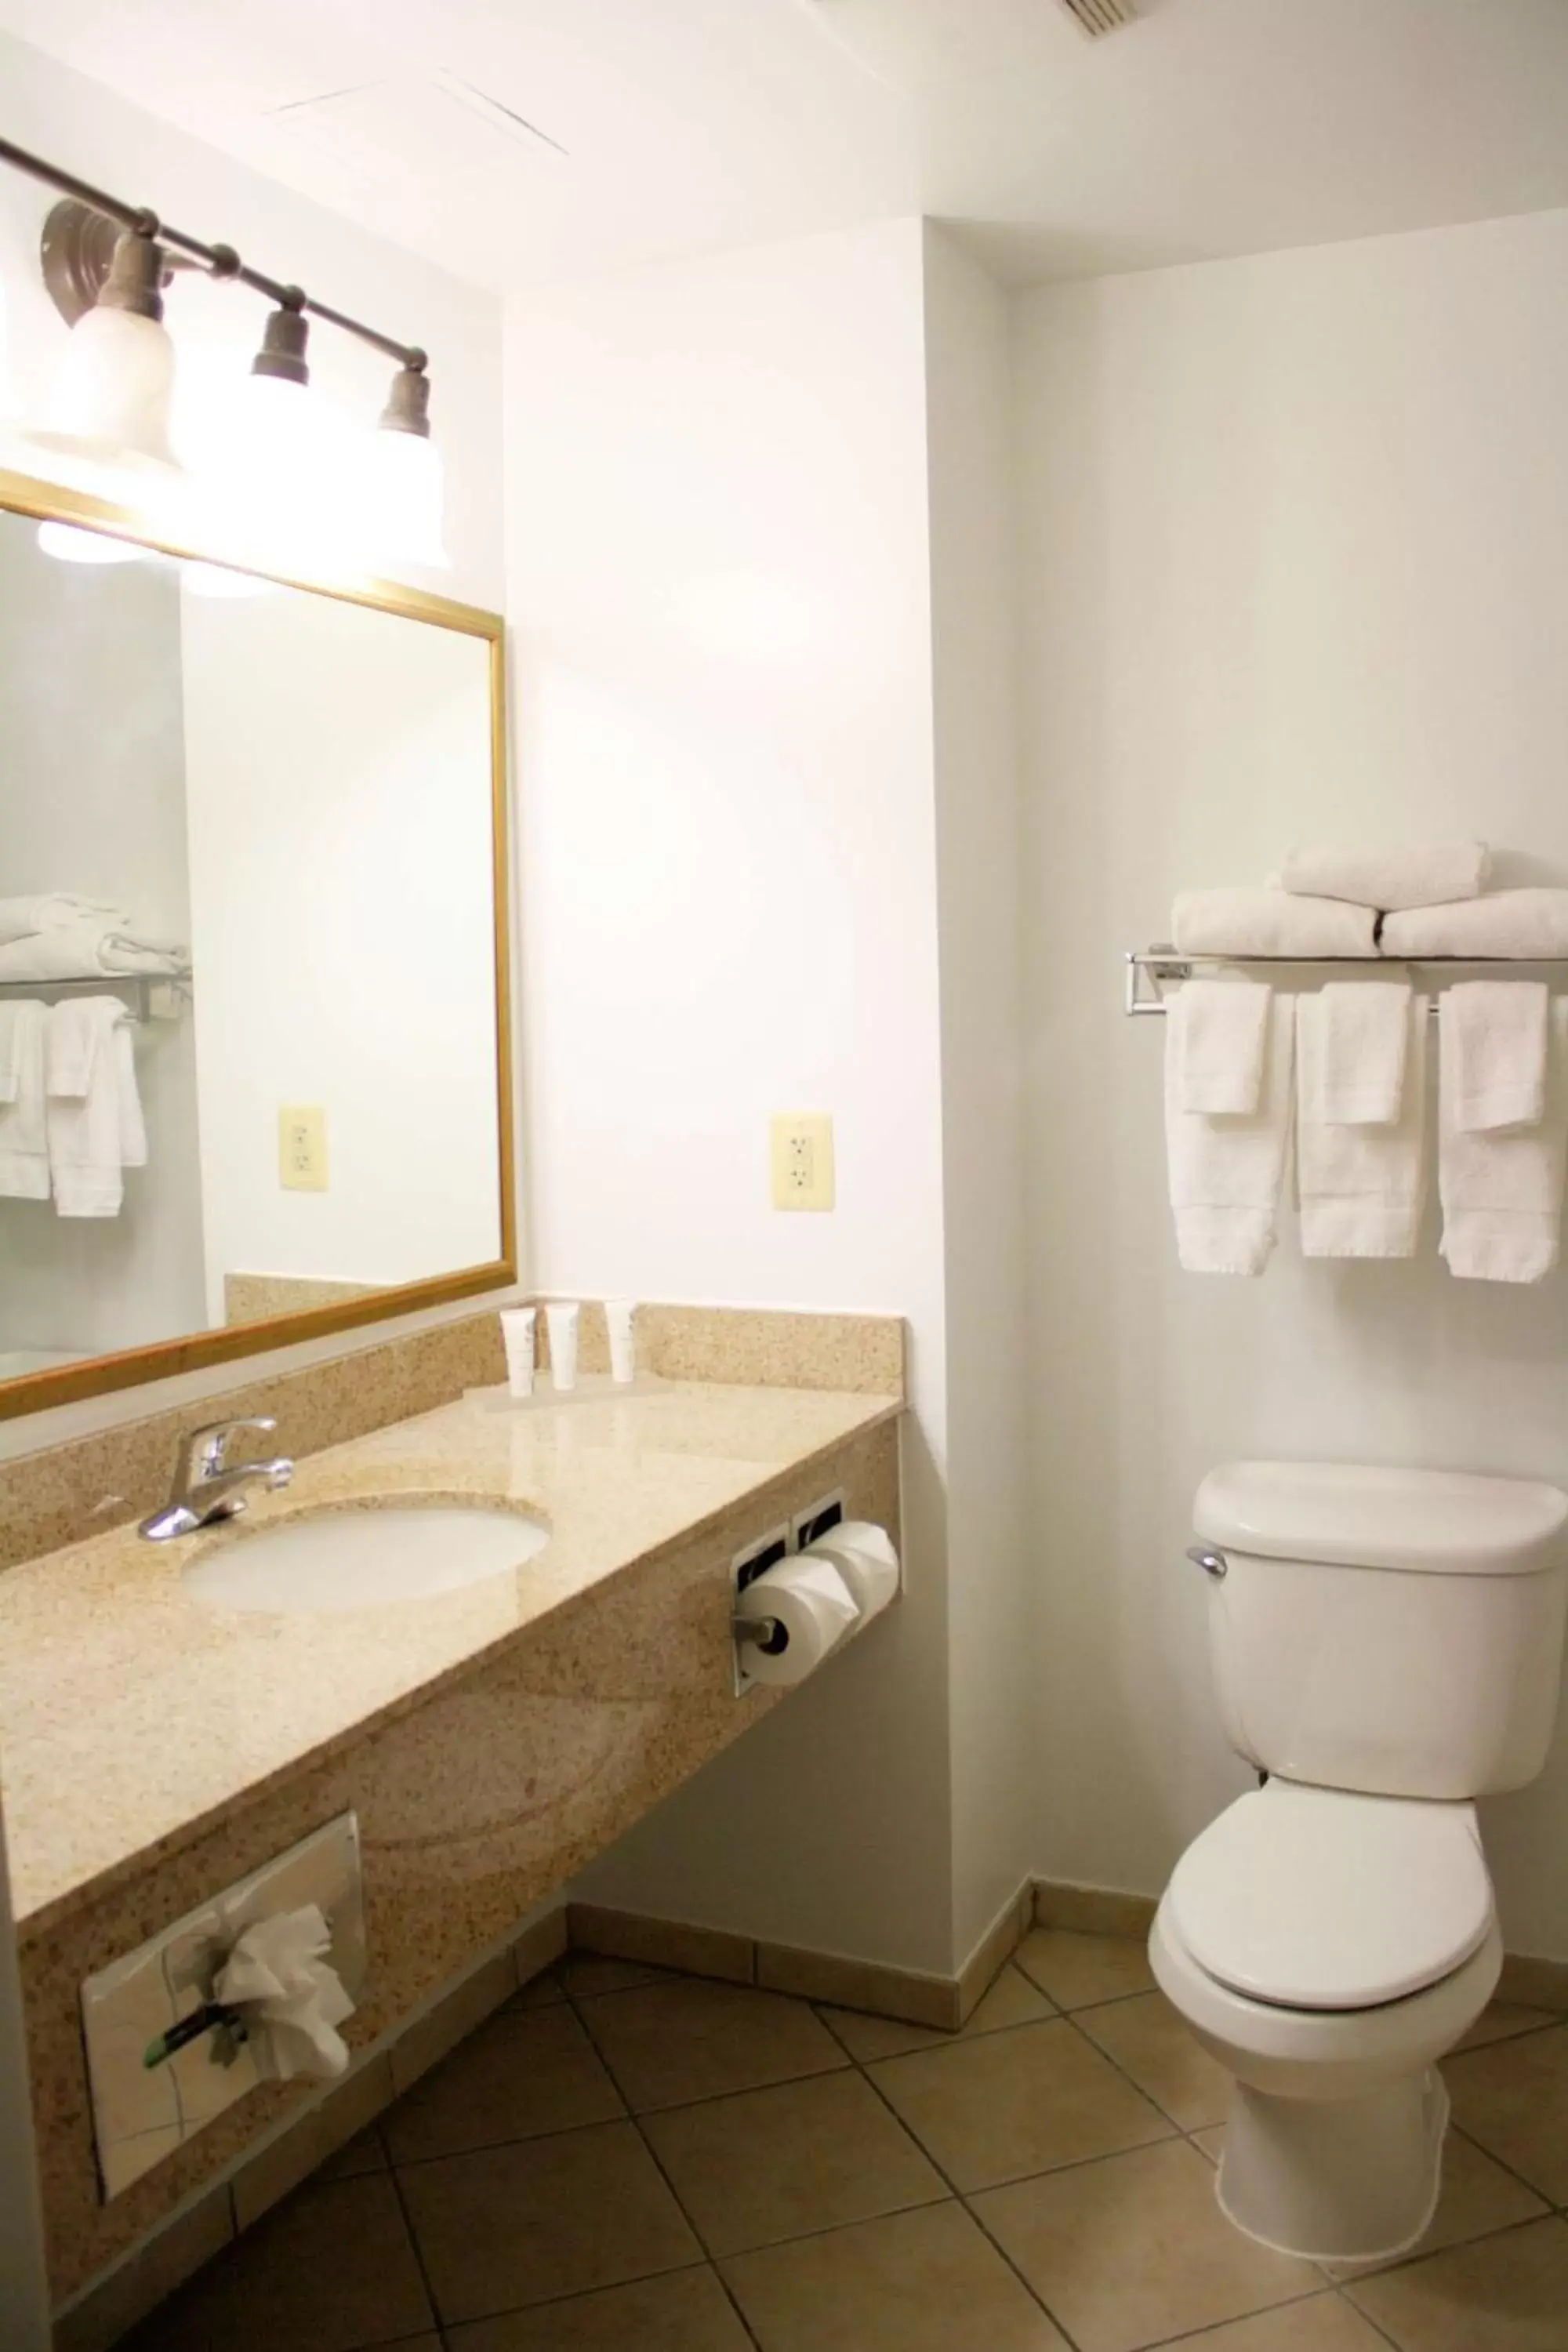 Bathroom in Country Inn & Suites by Radisson, BWI Airport (Baltimore), MD